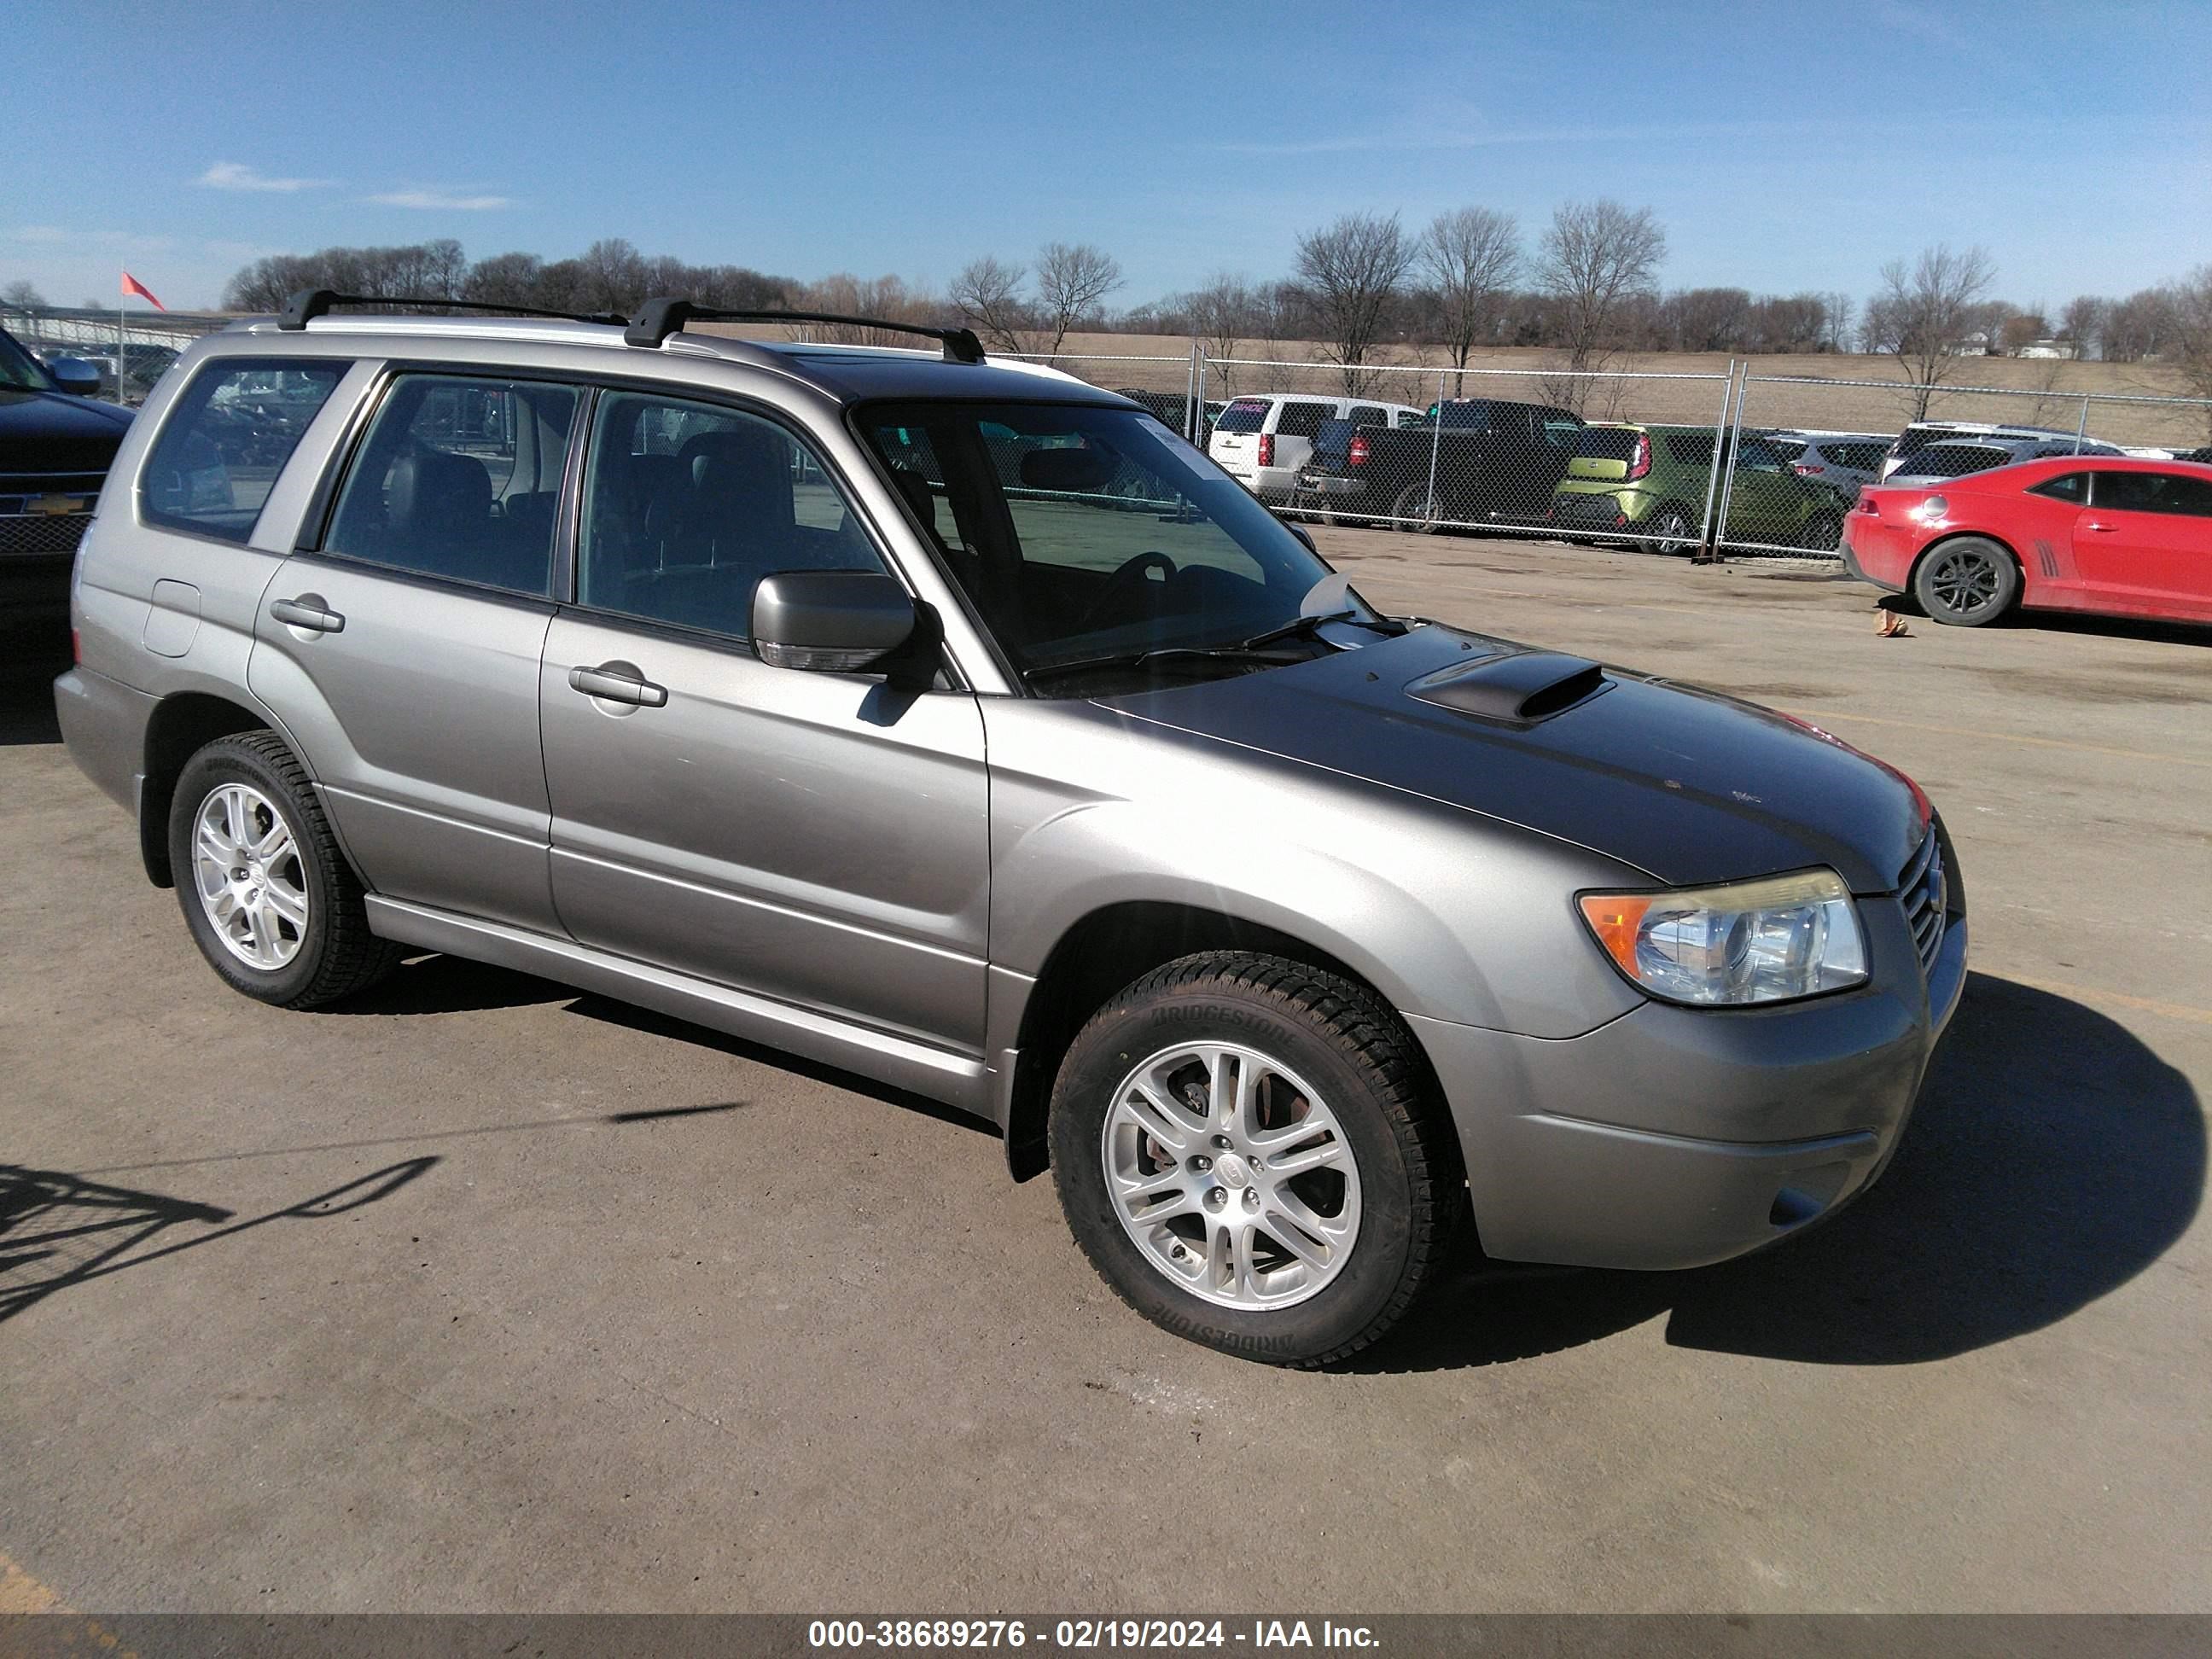 JF1SG69616H702911  - SUBARU FORESTER  2006 IMG - 0